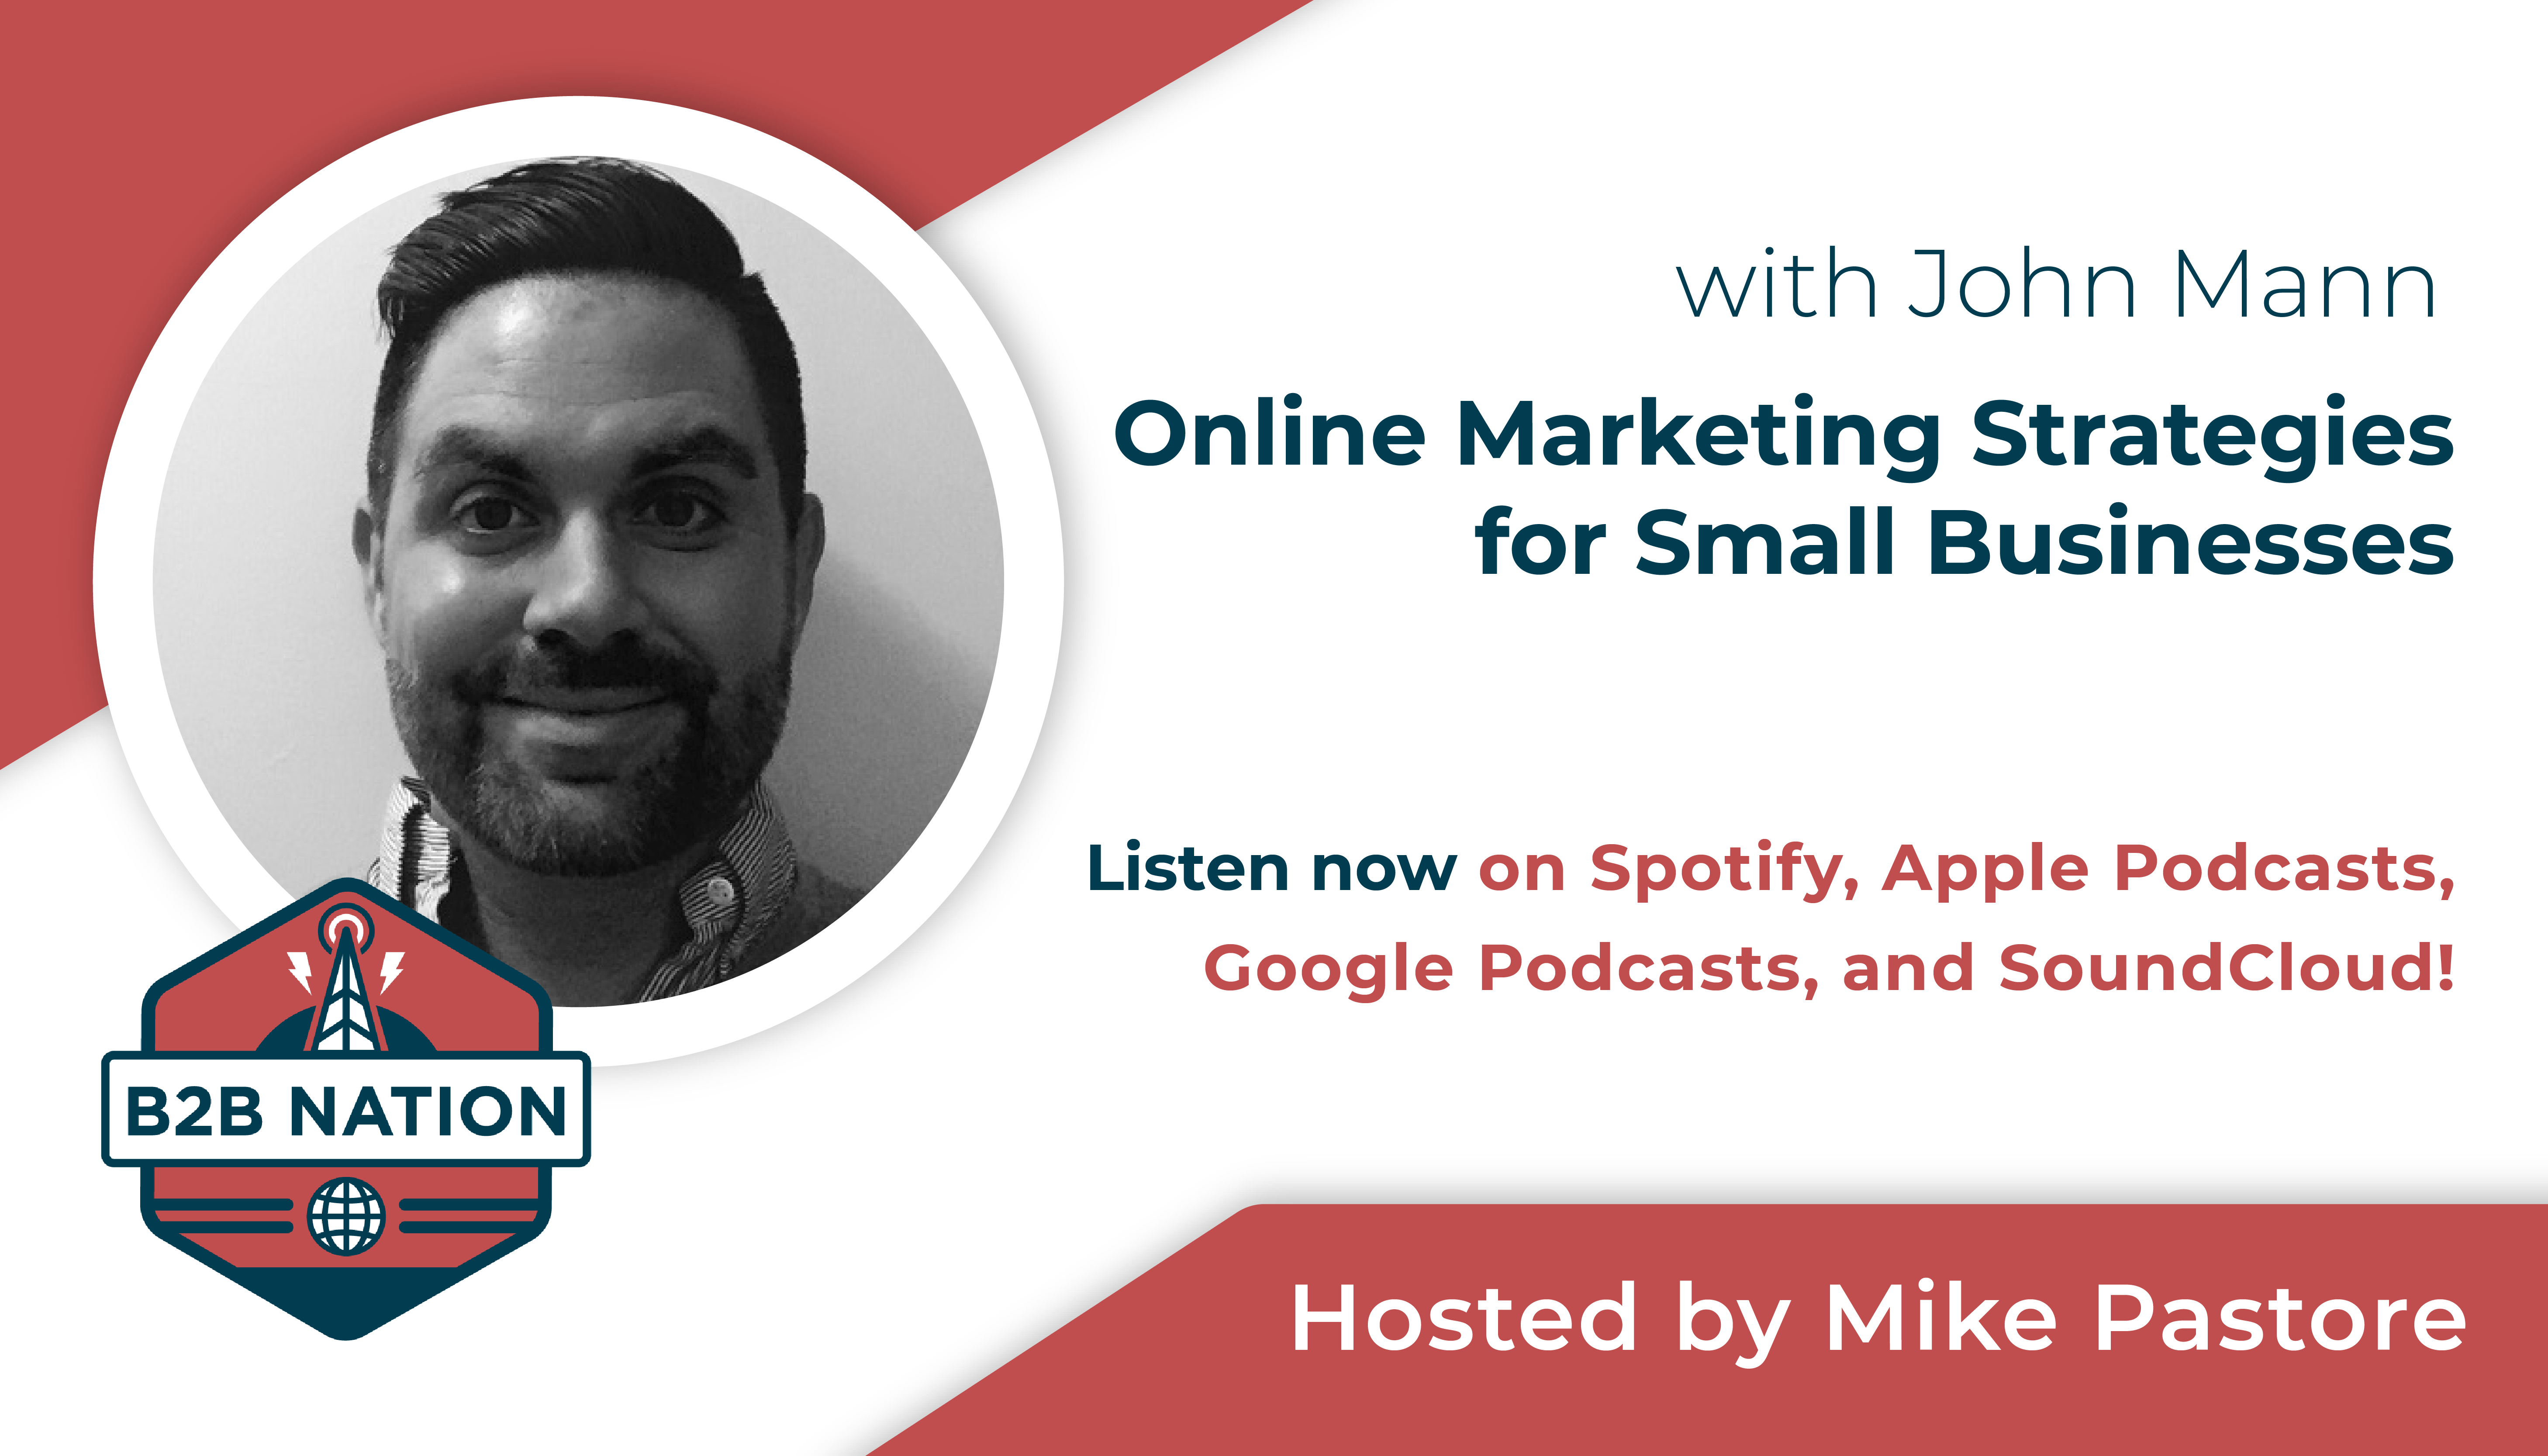 Podcast: Digital Marketing Strategies for Small Businesses